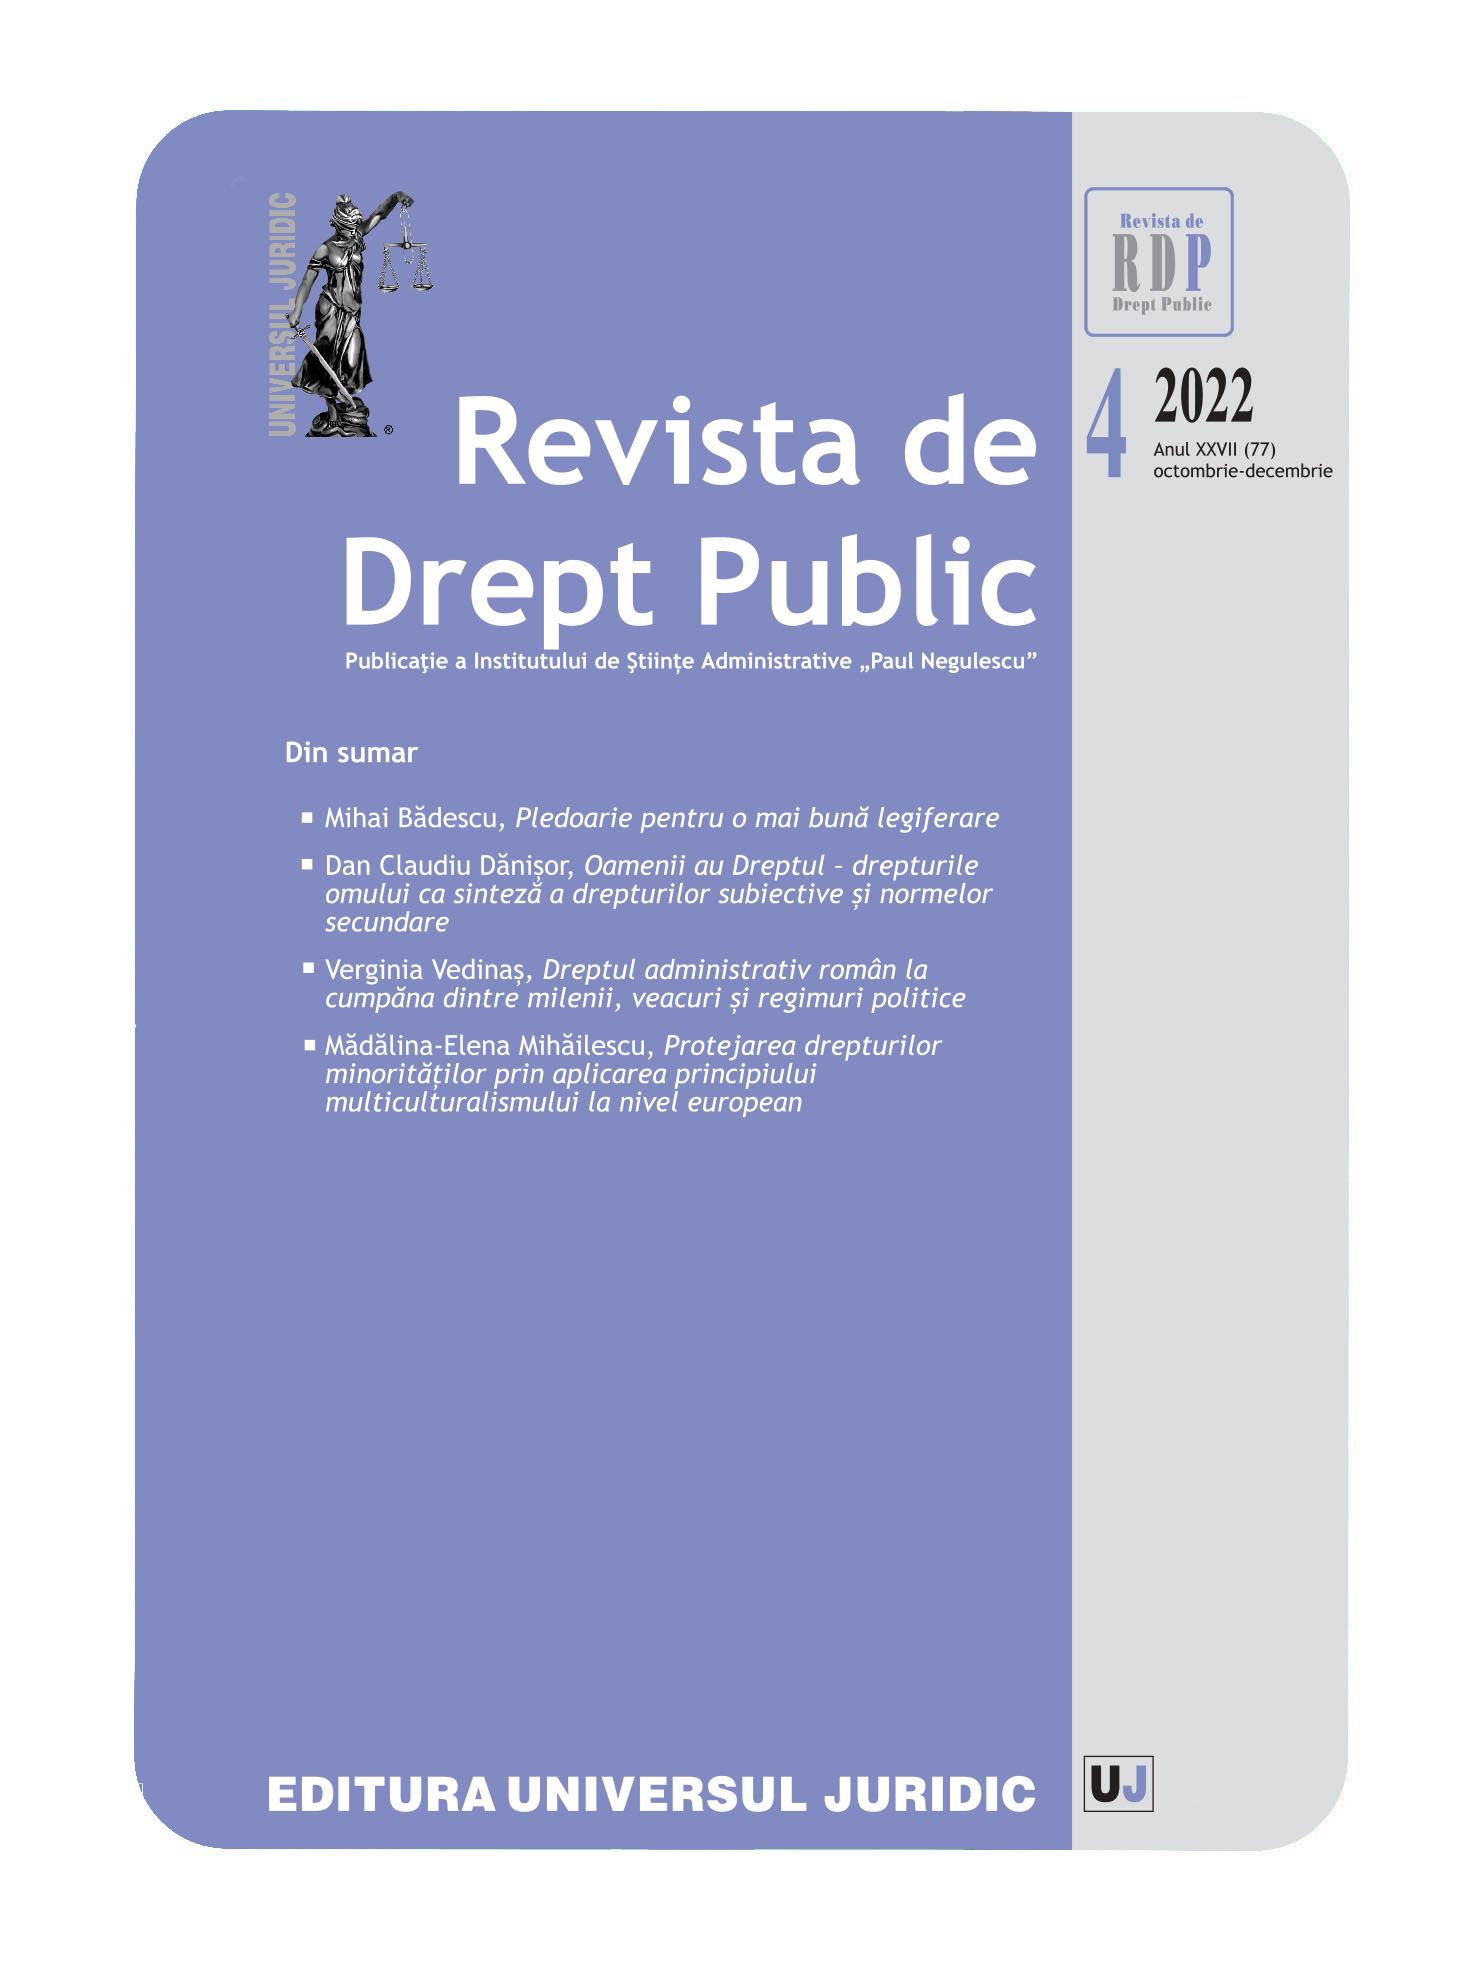 Termination of the mayor's mandate by local referenduma Cover Image